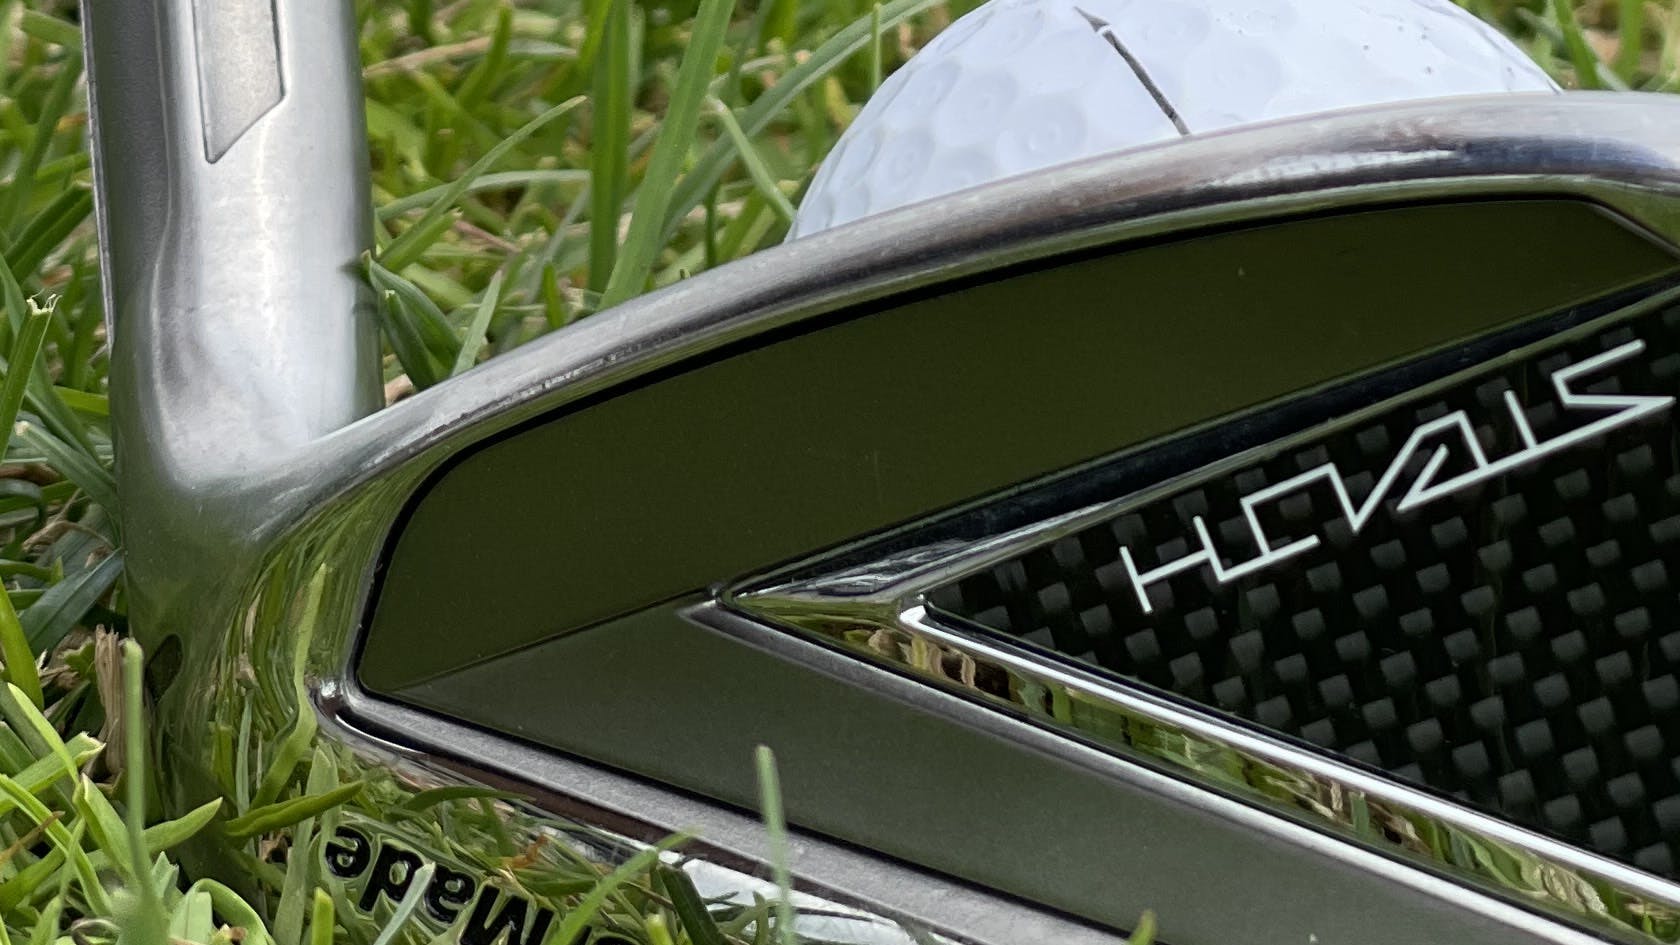 The TaylorMade Stealth Iron in front of a ball in some grass.